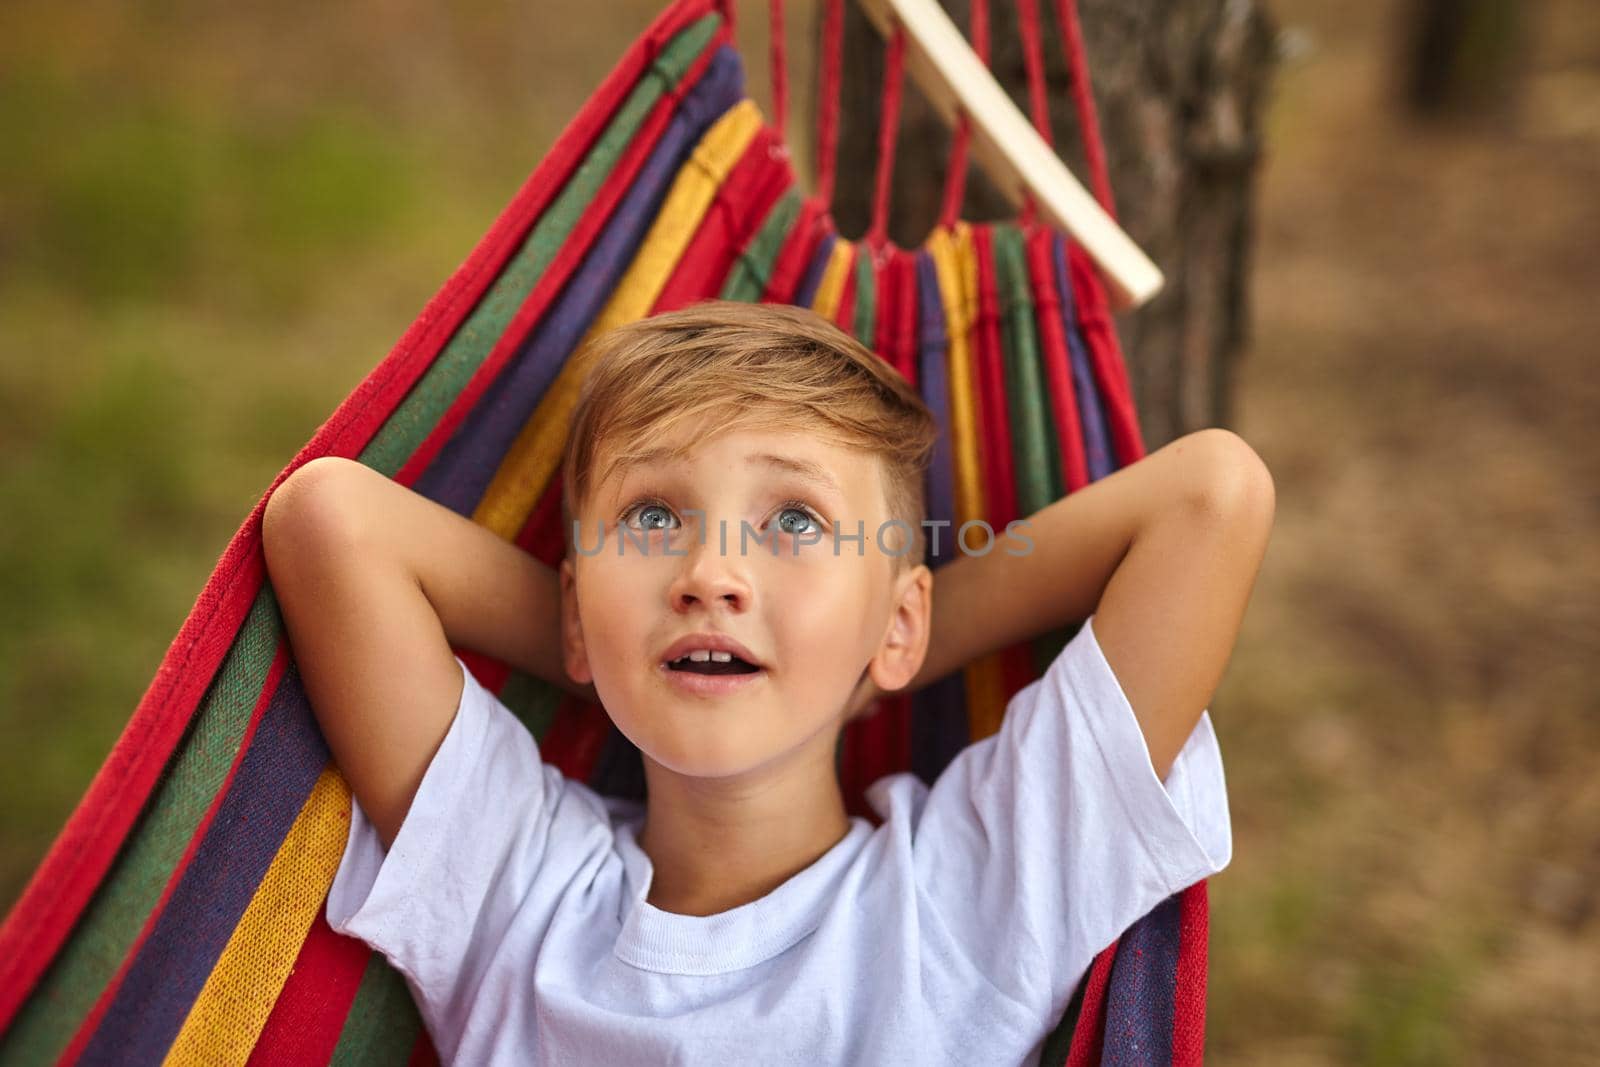 Cute boy is lying in a colorful hammock. The kid is riding in a hammock. Leisure concept